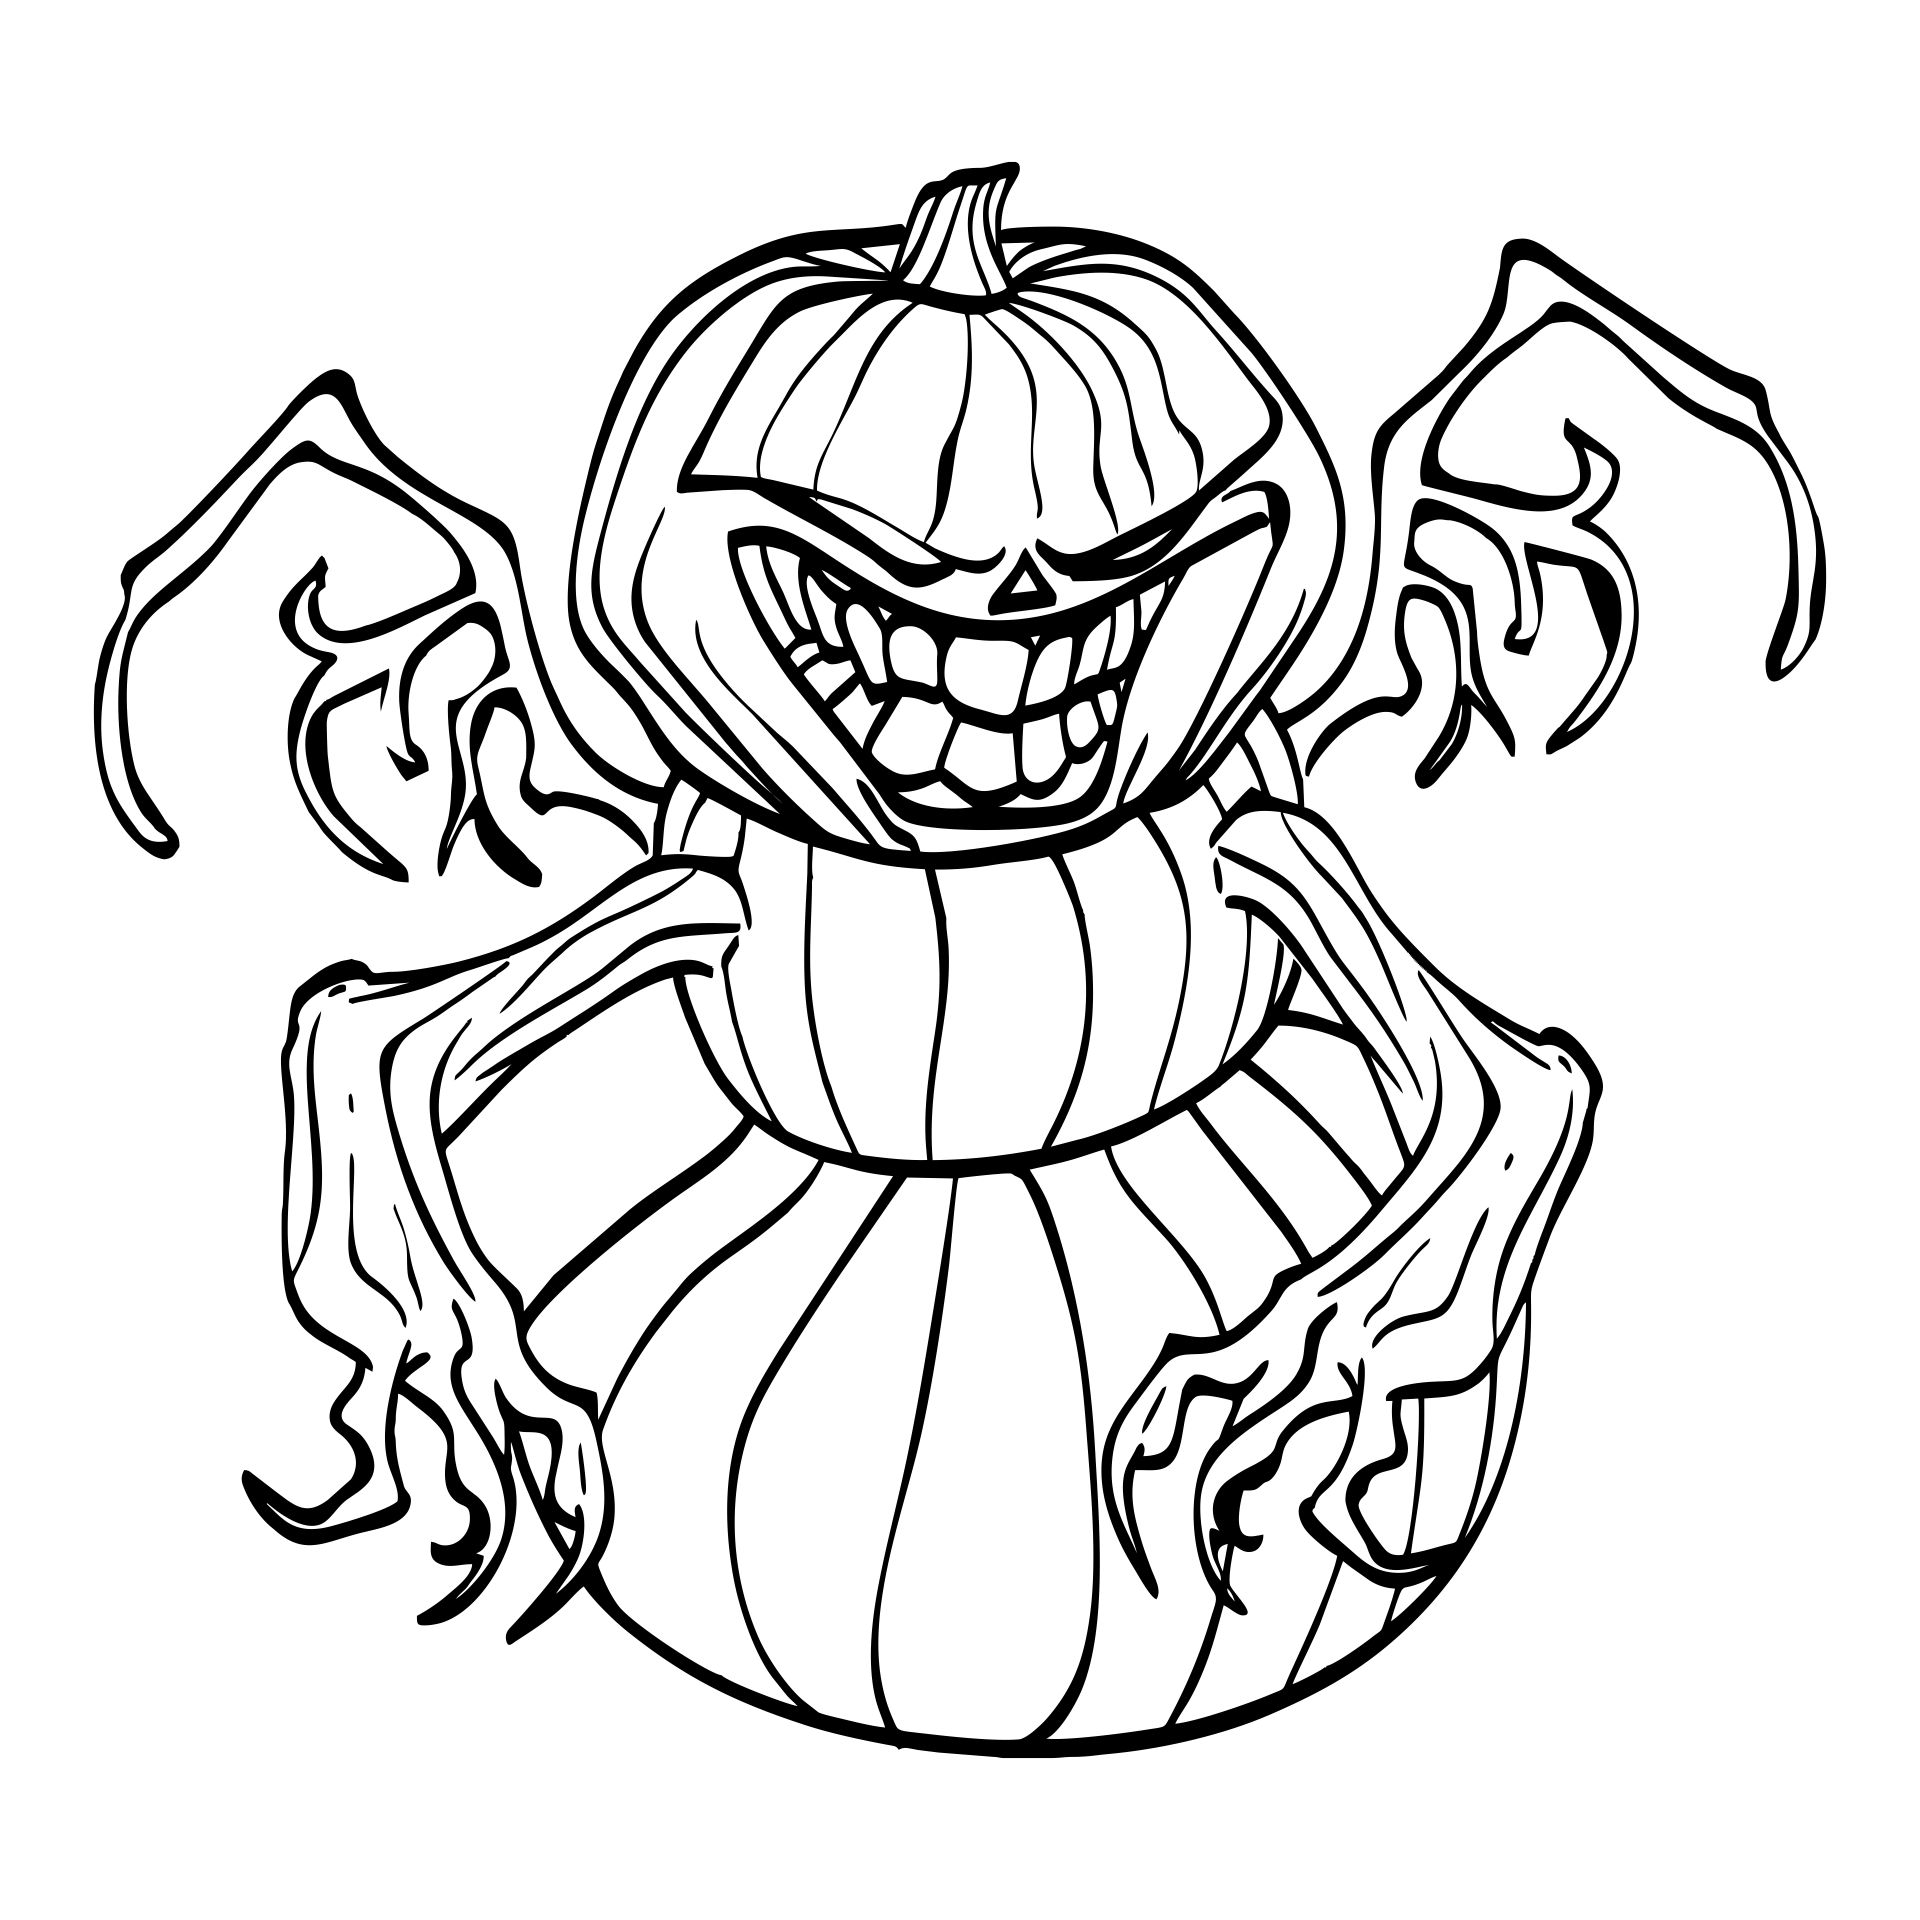 free printable scary halloween coloring pages